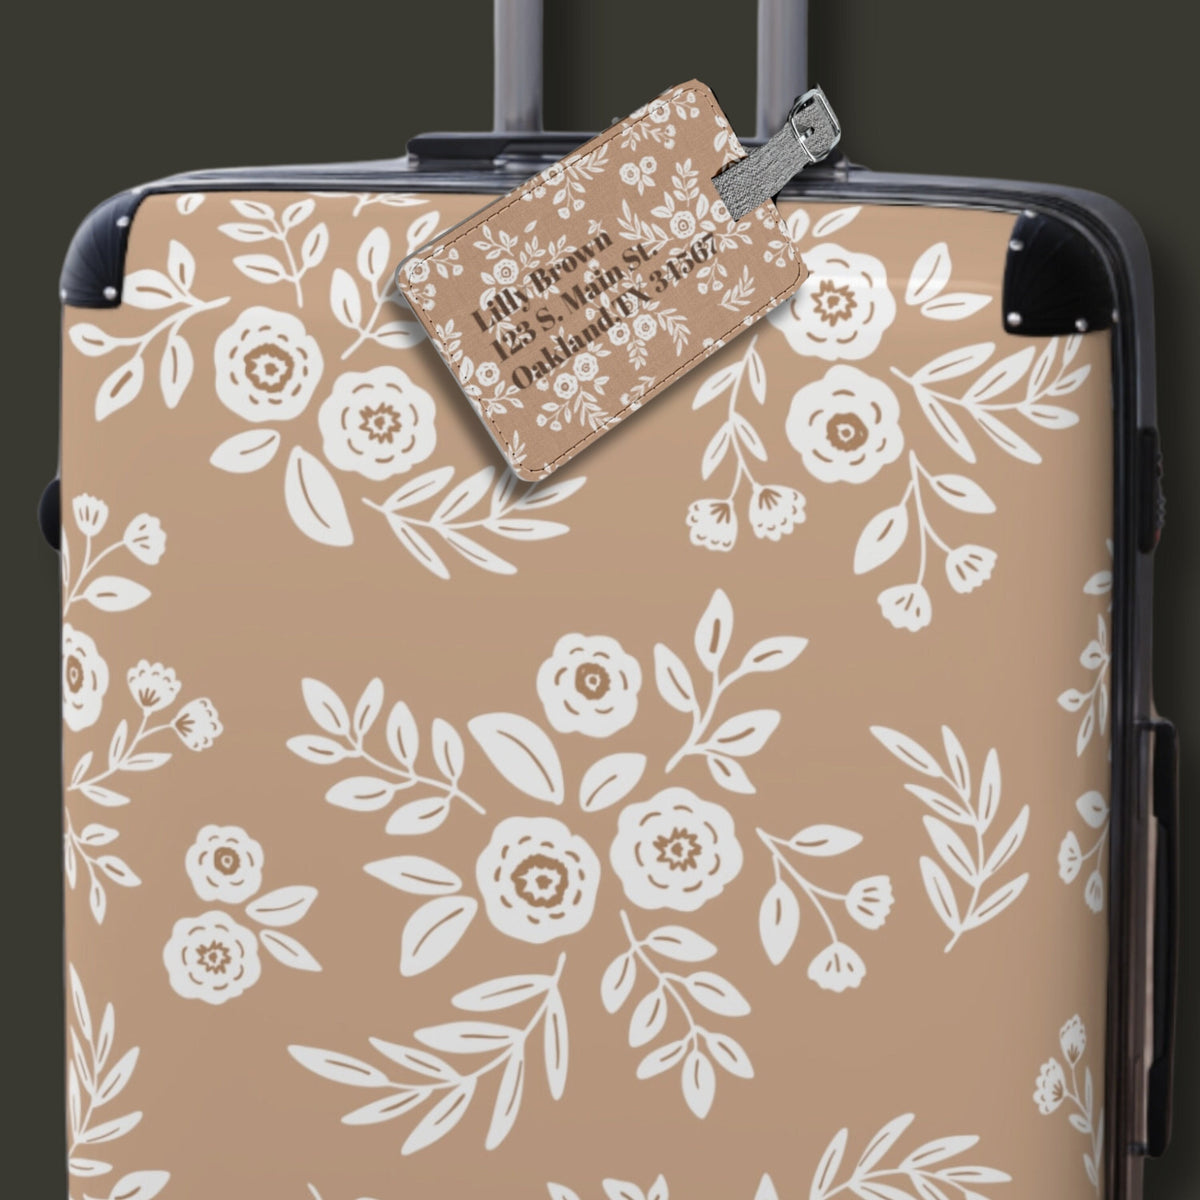 Boho Minimalist Coordinating Luggage Set Floral Custom Luggage Tag and Suitcase Matching Travel Accessory Gift for Sister Personalize Name